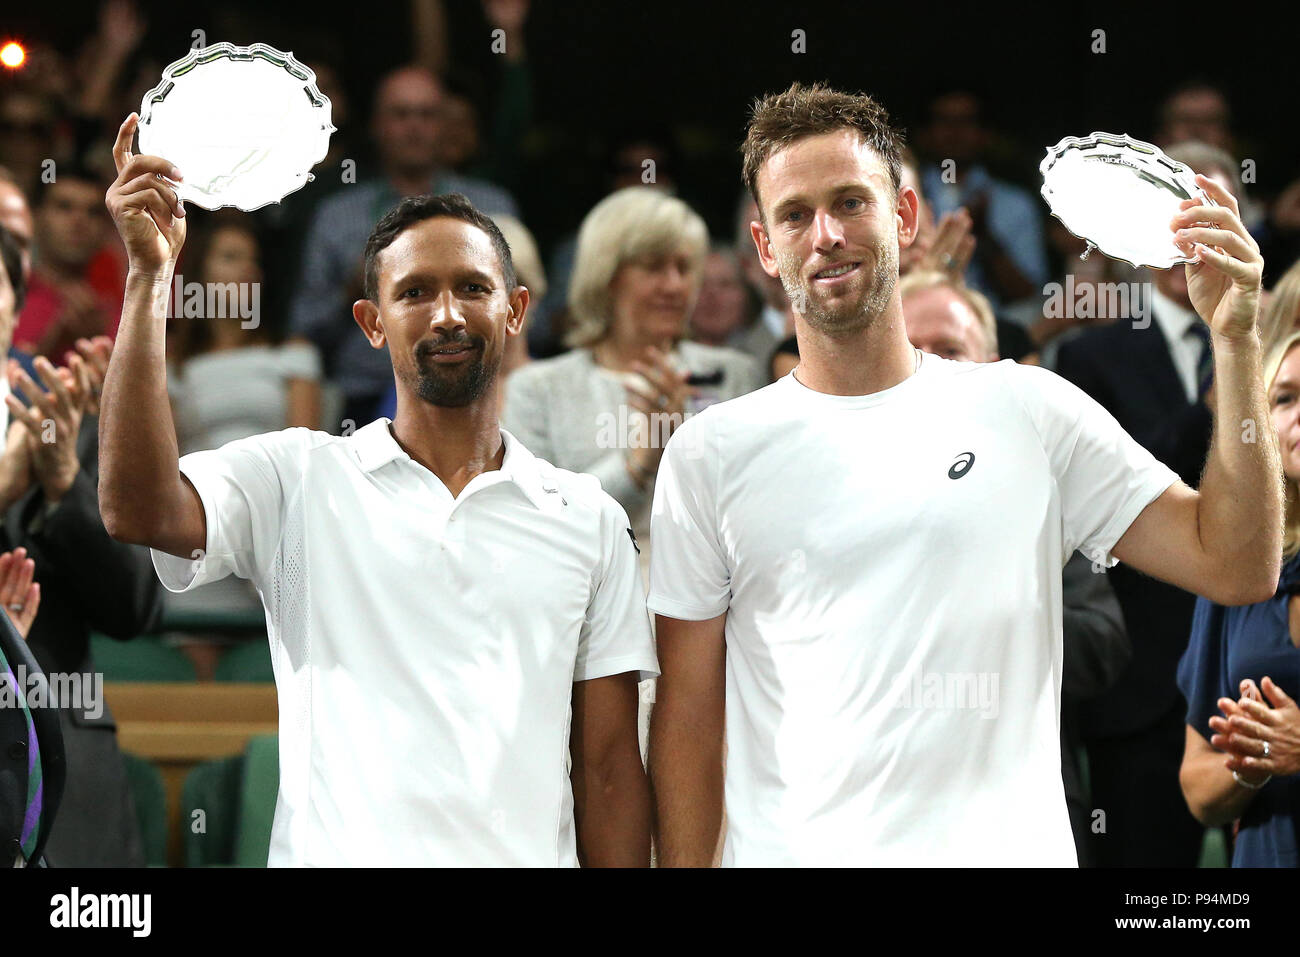 Raven Klaasen (left) and Michael Venus hold up the runners up trophy after the Gentlemen's doubles final on day twelve of the Wimbledon Championships at the All England Lawn Tennis and Croquet Club, Wimbledon. PRESS ASSOCIATION Photo. Picture date: Saturday July 14, 2018. See PA story TENNIS Wimbledon. Photo credit should read: Jonathan Brady/PA Wire. RESTRICTIONS: No commercial use without prior written consent of the AELTC. Still image use only - no moving images to emulate broadcast. No superimposing or removal of sponsor/ad logos. Stock Photo